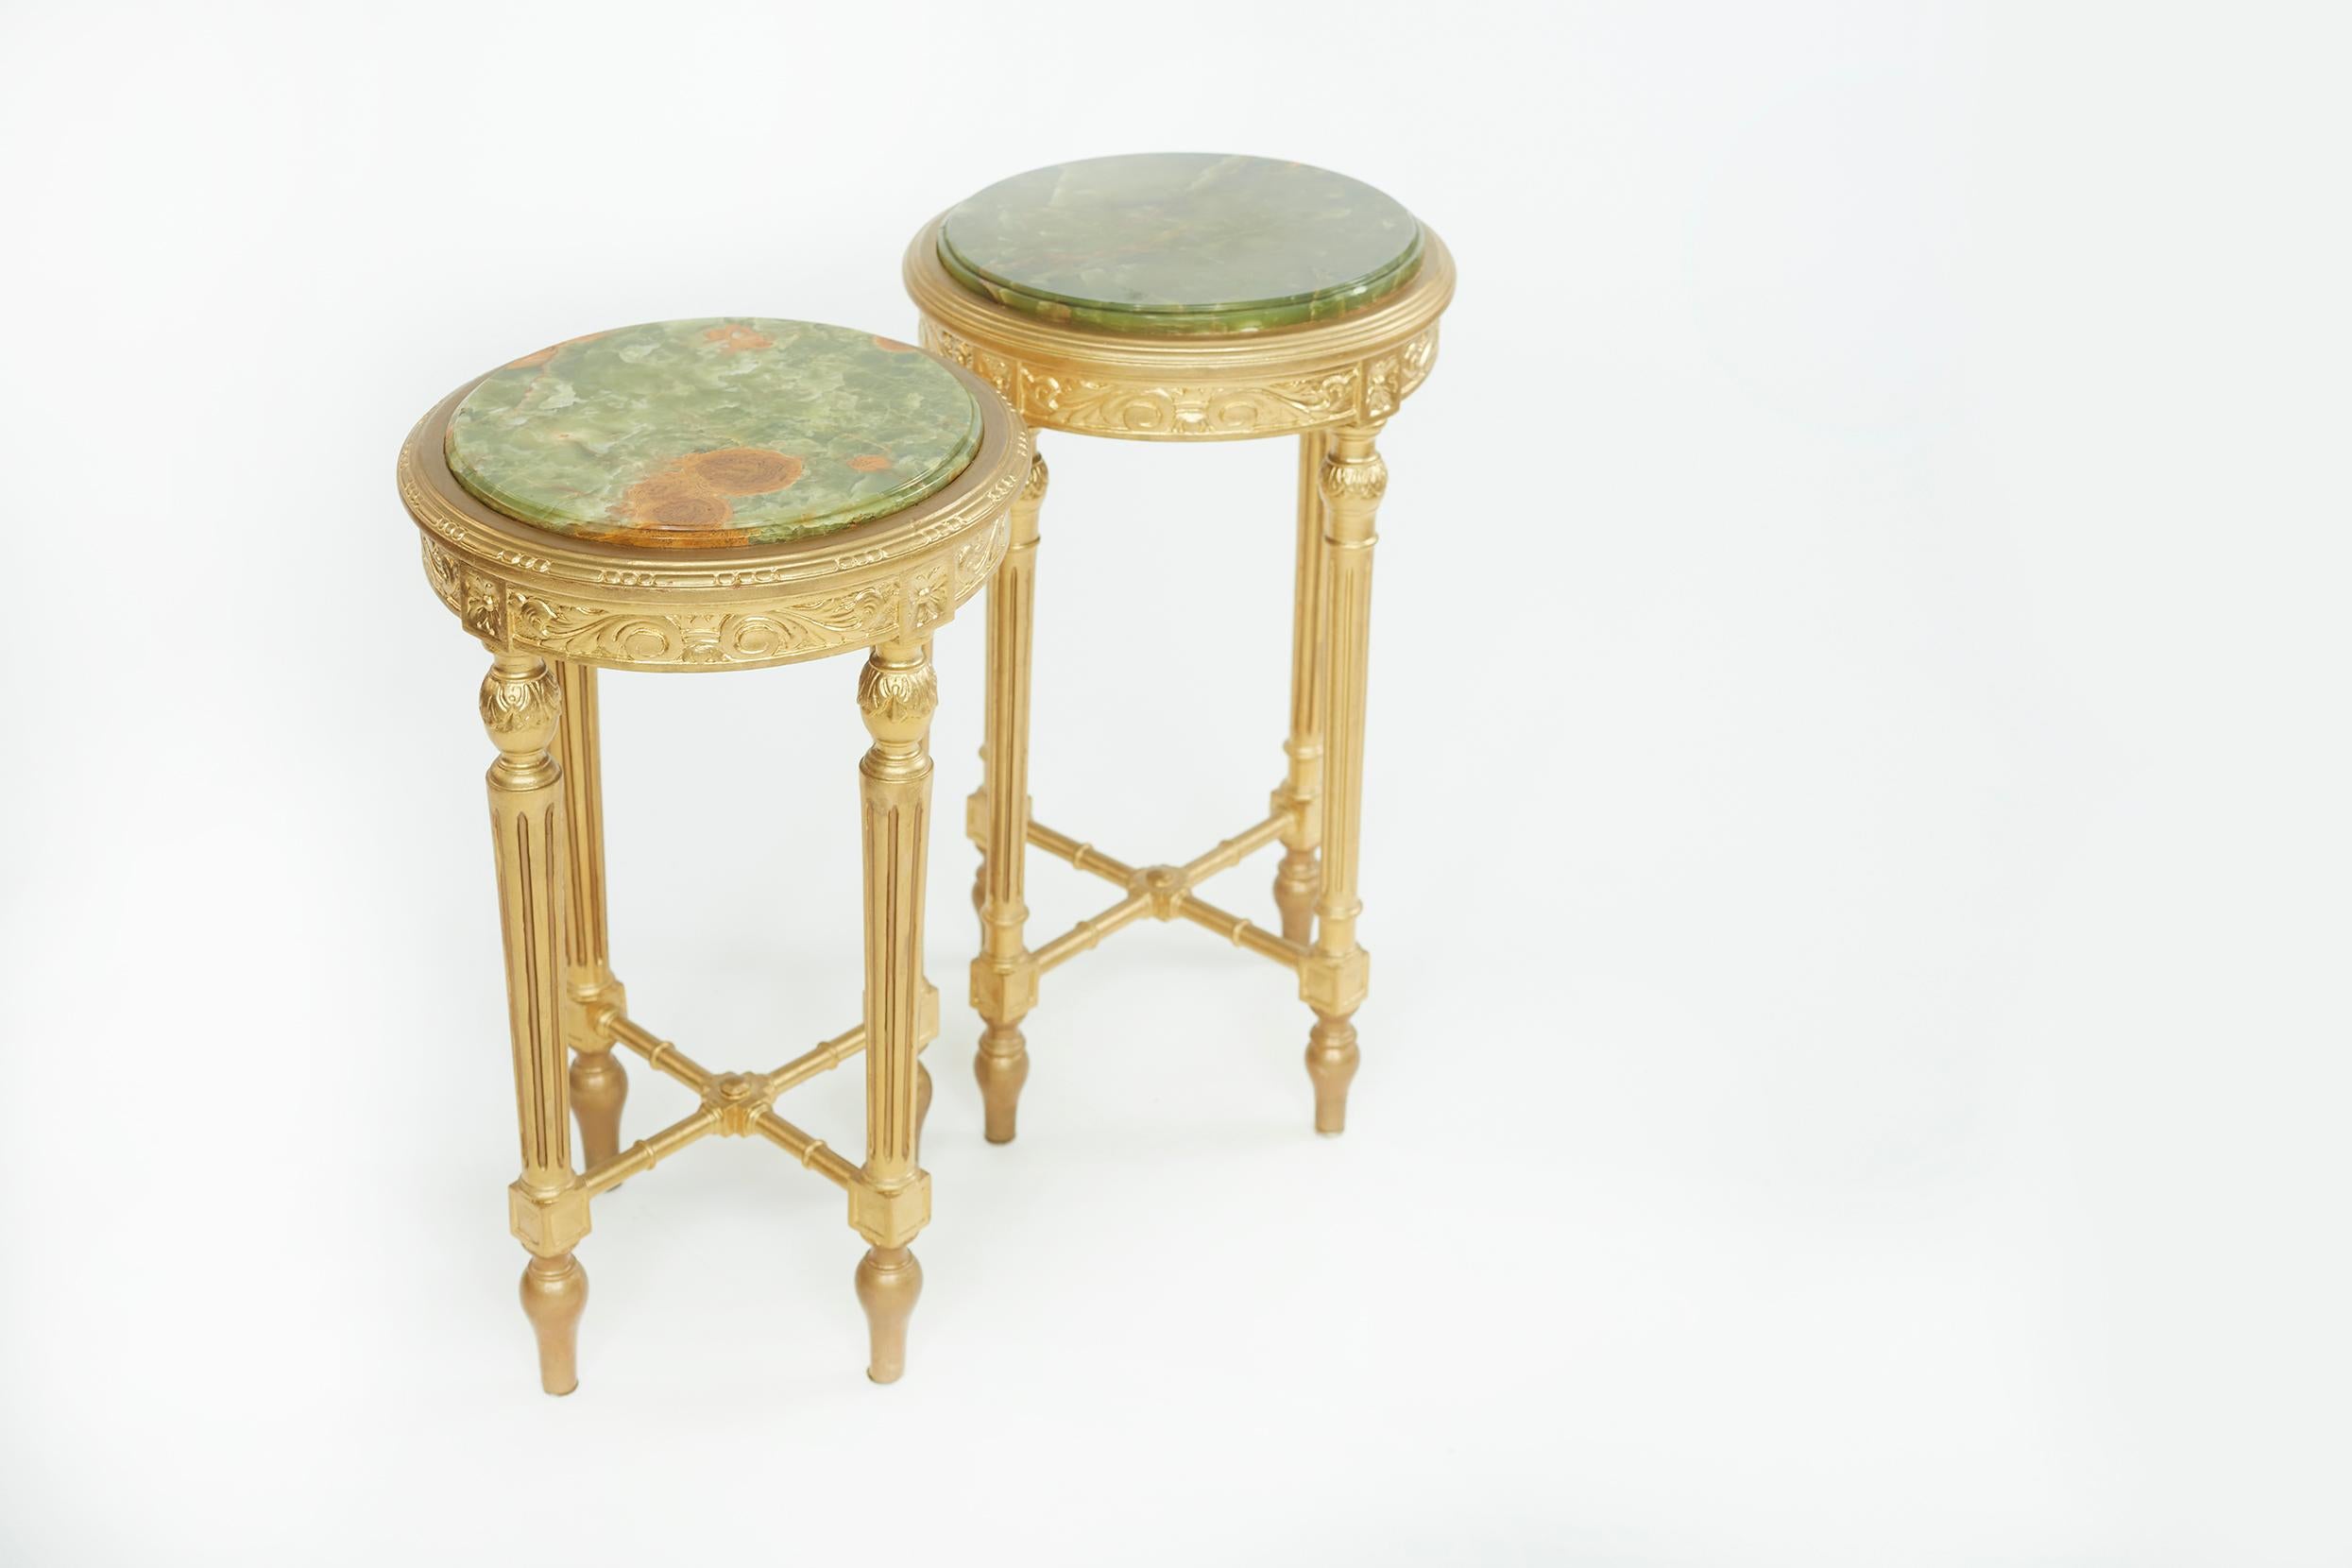 Hand carved gilt wood framed with exterior design details / Onyx top round shape pair side table. Each side table is in great condition. Minor wear consistent with age / use. Each table stands about 26 inches high x 15 1/2 inches top diameter.